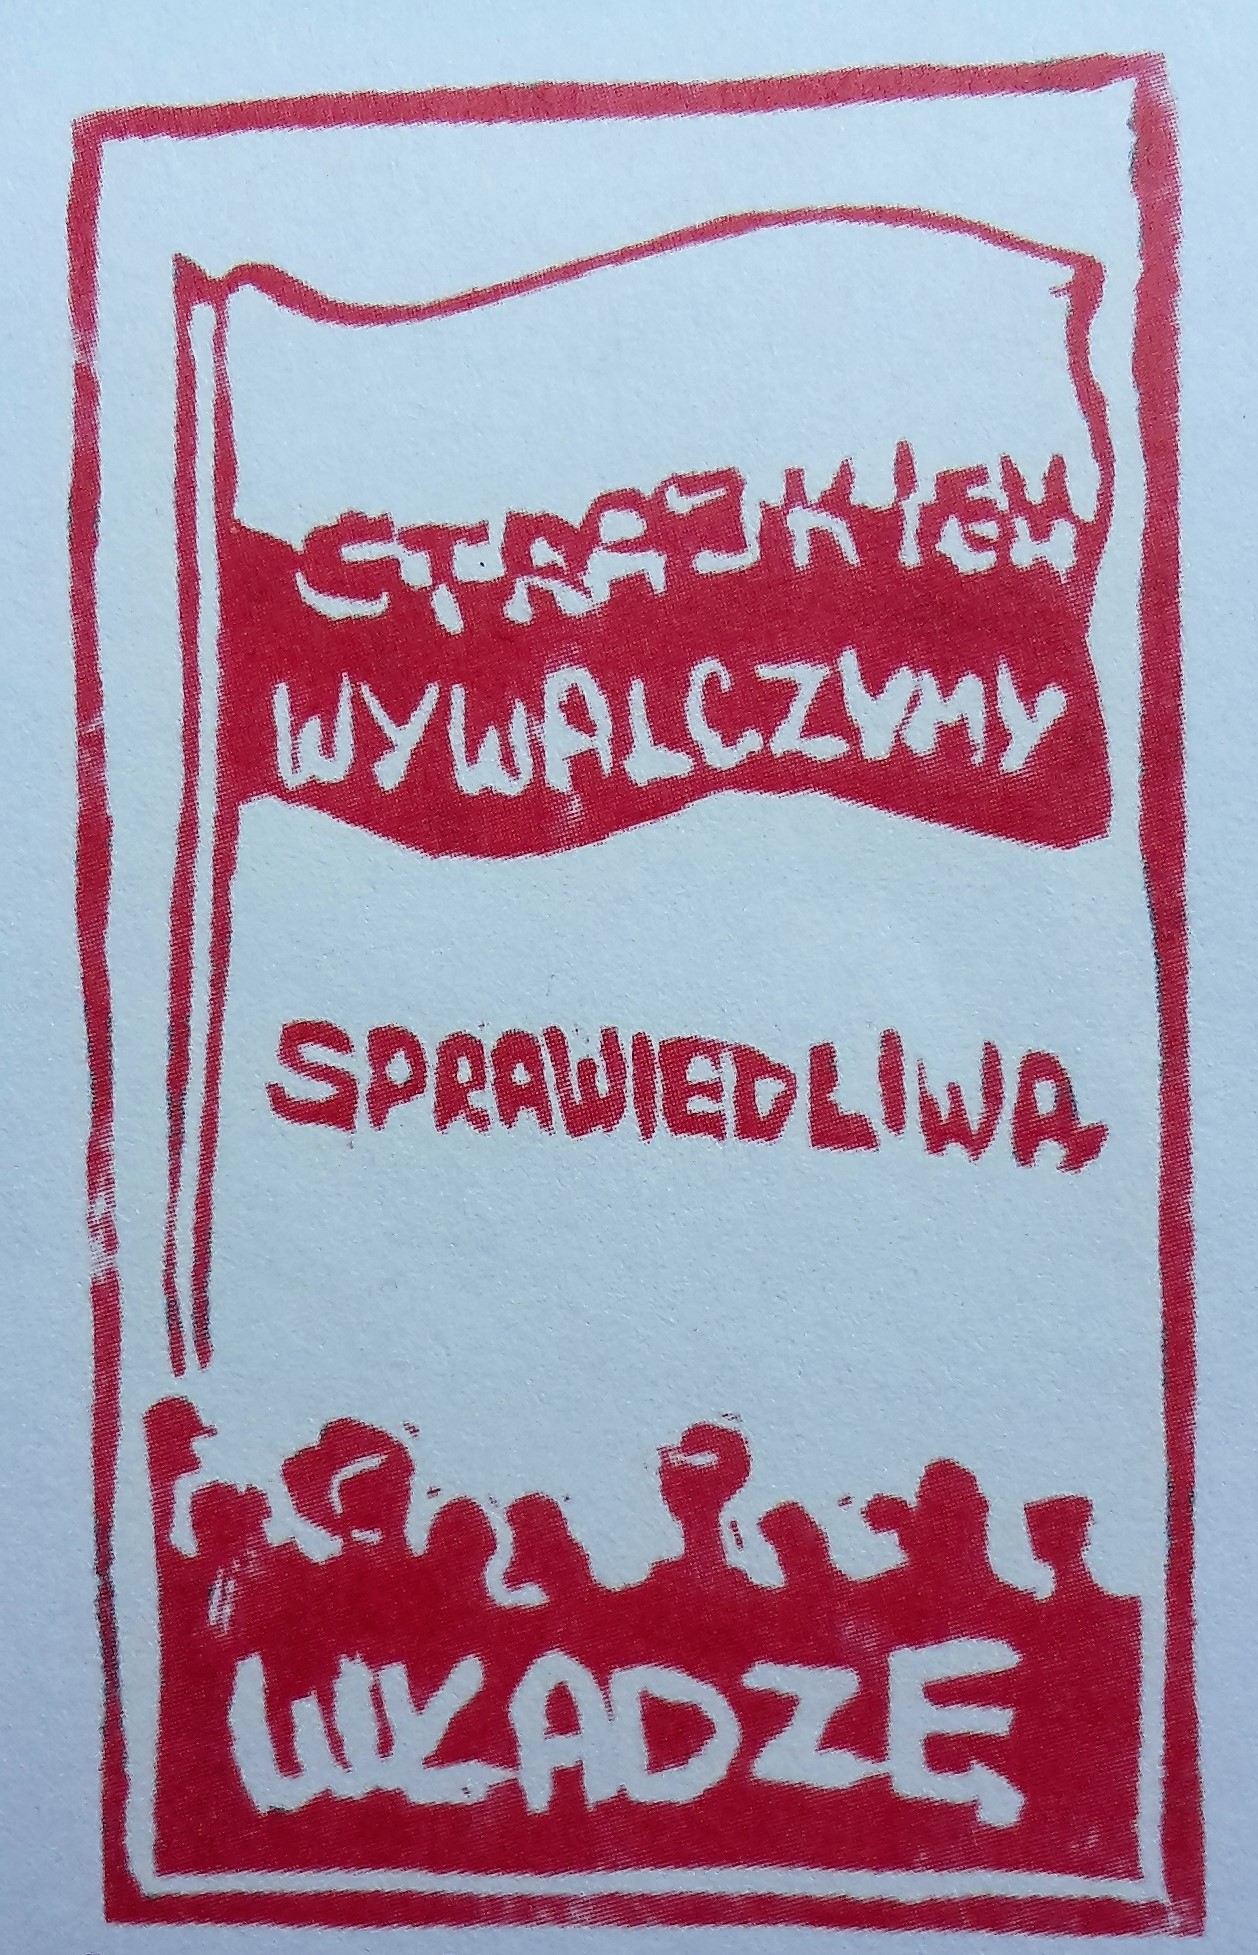 The seal created by 15-year-old Dąbrówka Figiela to support the strikes in Gdansk Shipyard in August 1980. The picture shows a copy made out from the linocut.